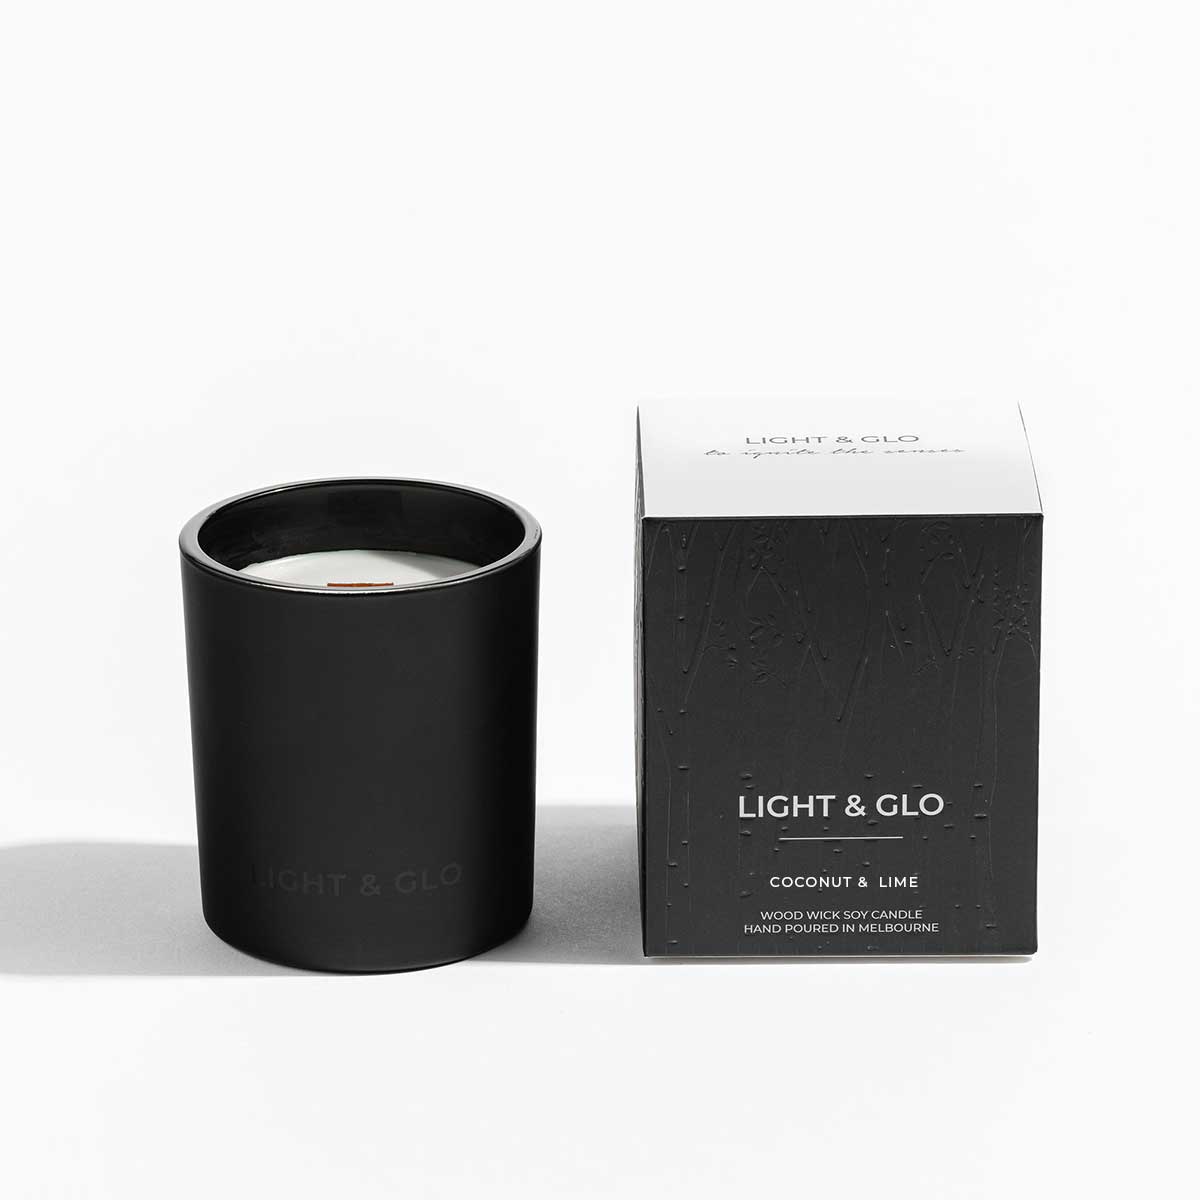 Coconut & Lime - Monochrome Large 300g Candle | Luxury Candles & Home Fragrances by Light + Glo